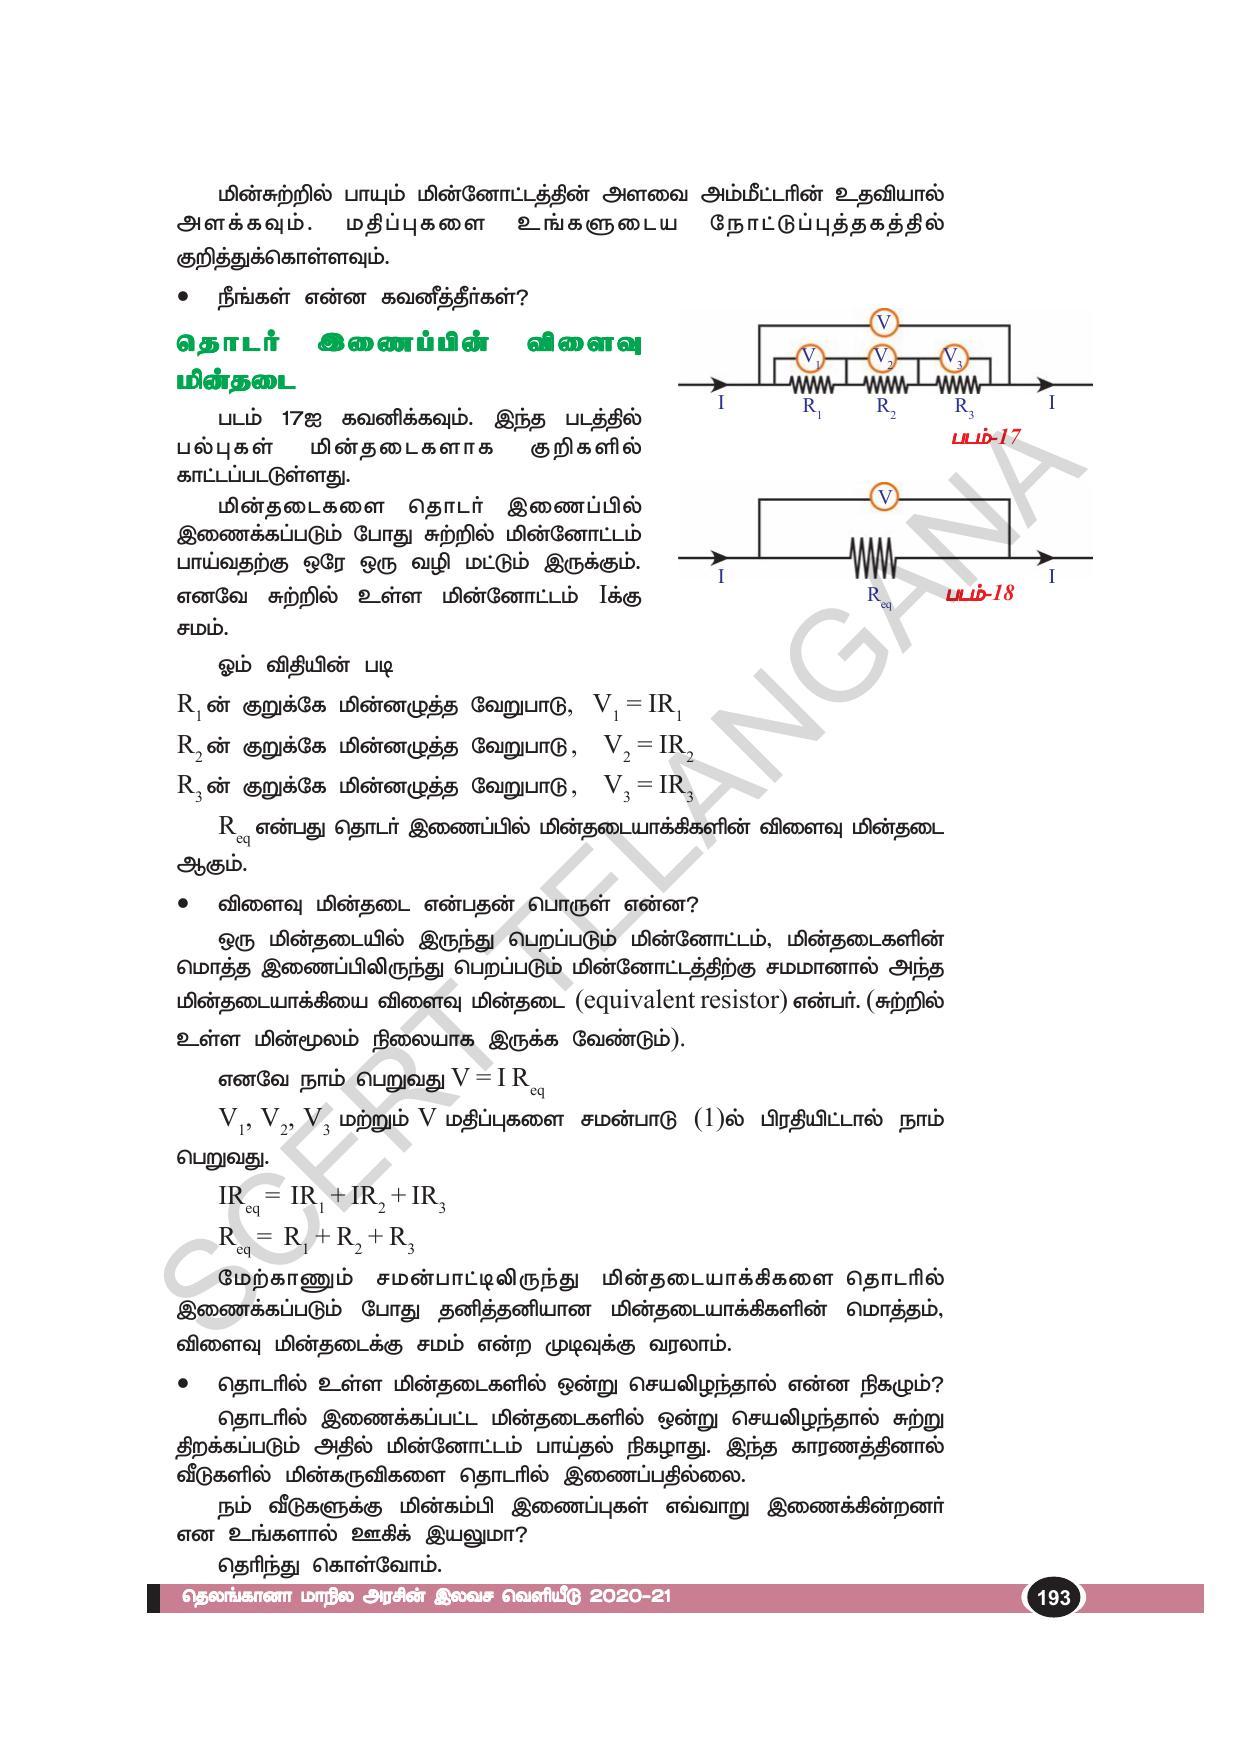 TS SCERT Class 10 Physical Science(Tamil Medium) Text Book - Page 205